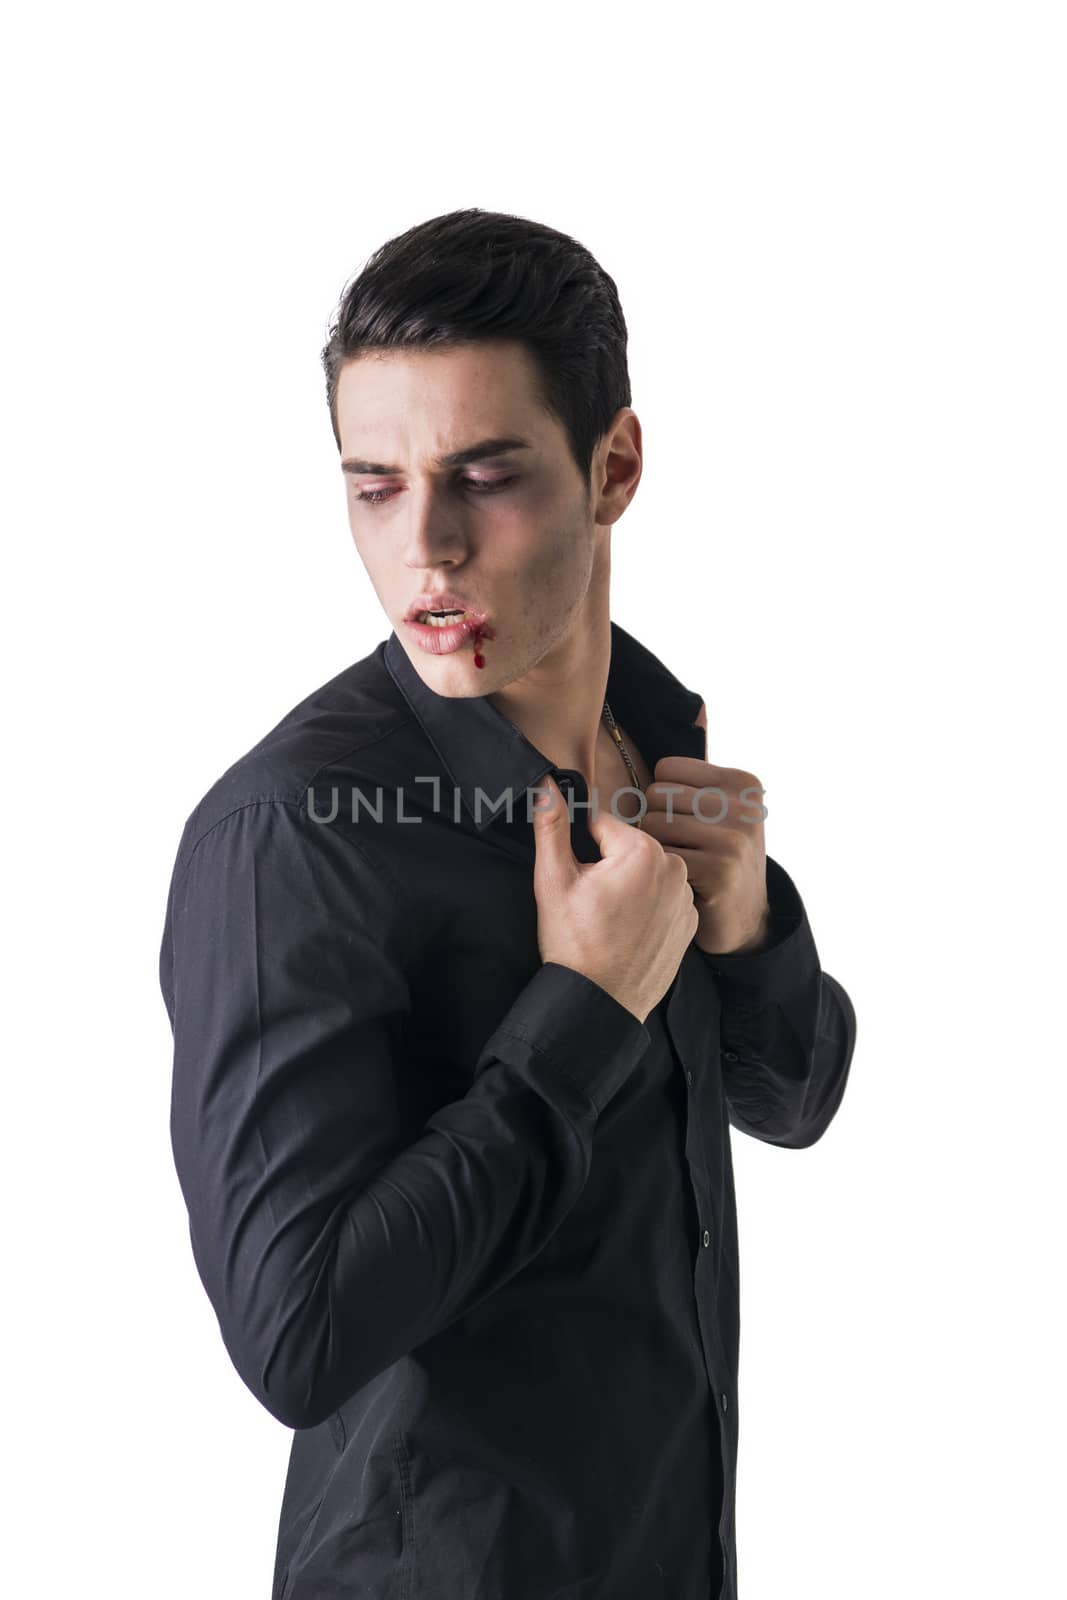 Portrait of a Young Vampire Man with Black T-Shirt, Looking at the Camera, Isolated on White Background.